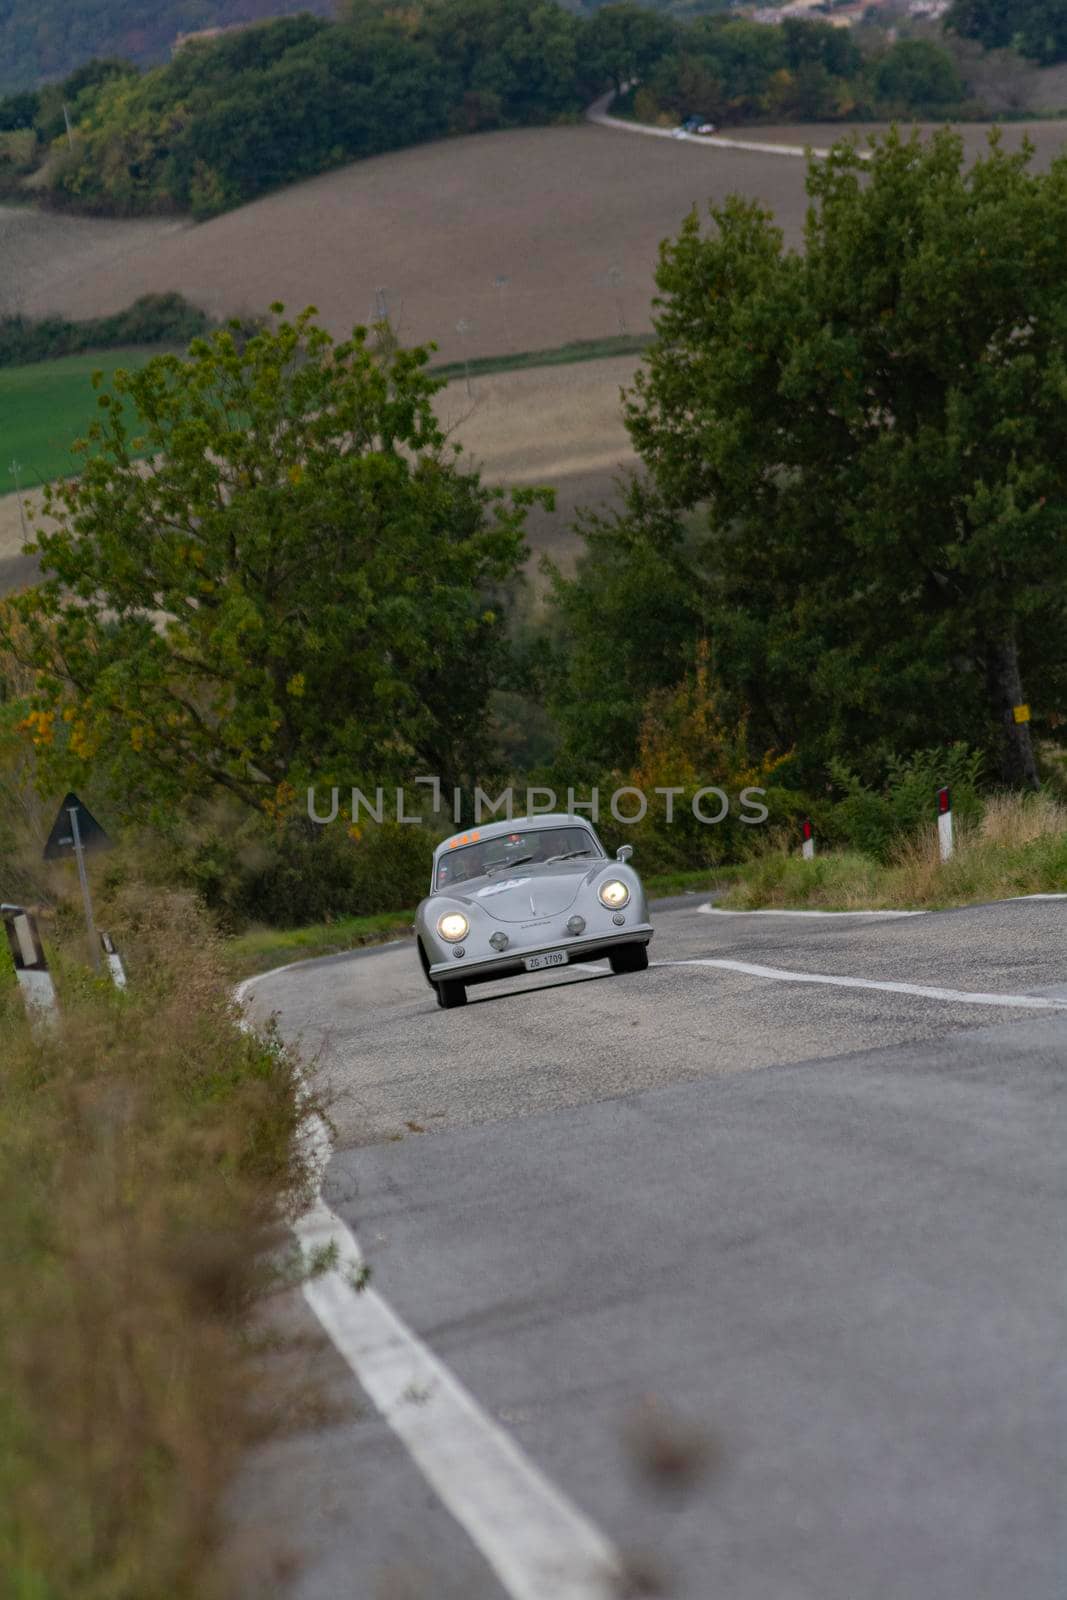 PORSCHE 356 1500 SUPER COUPÉ 1953 on an old racing car in rally Mille Miglia 2020 the famous italian historical race (1927-1957) by massimocampanari